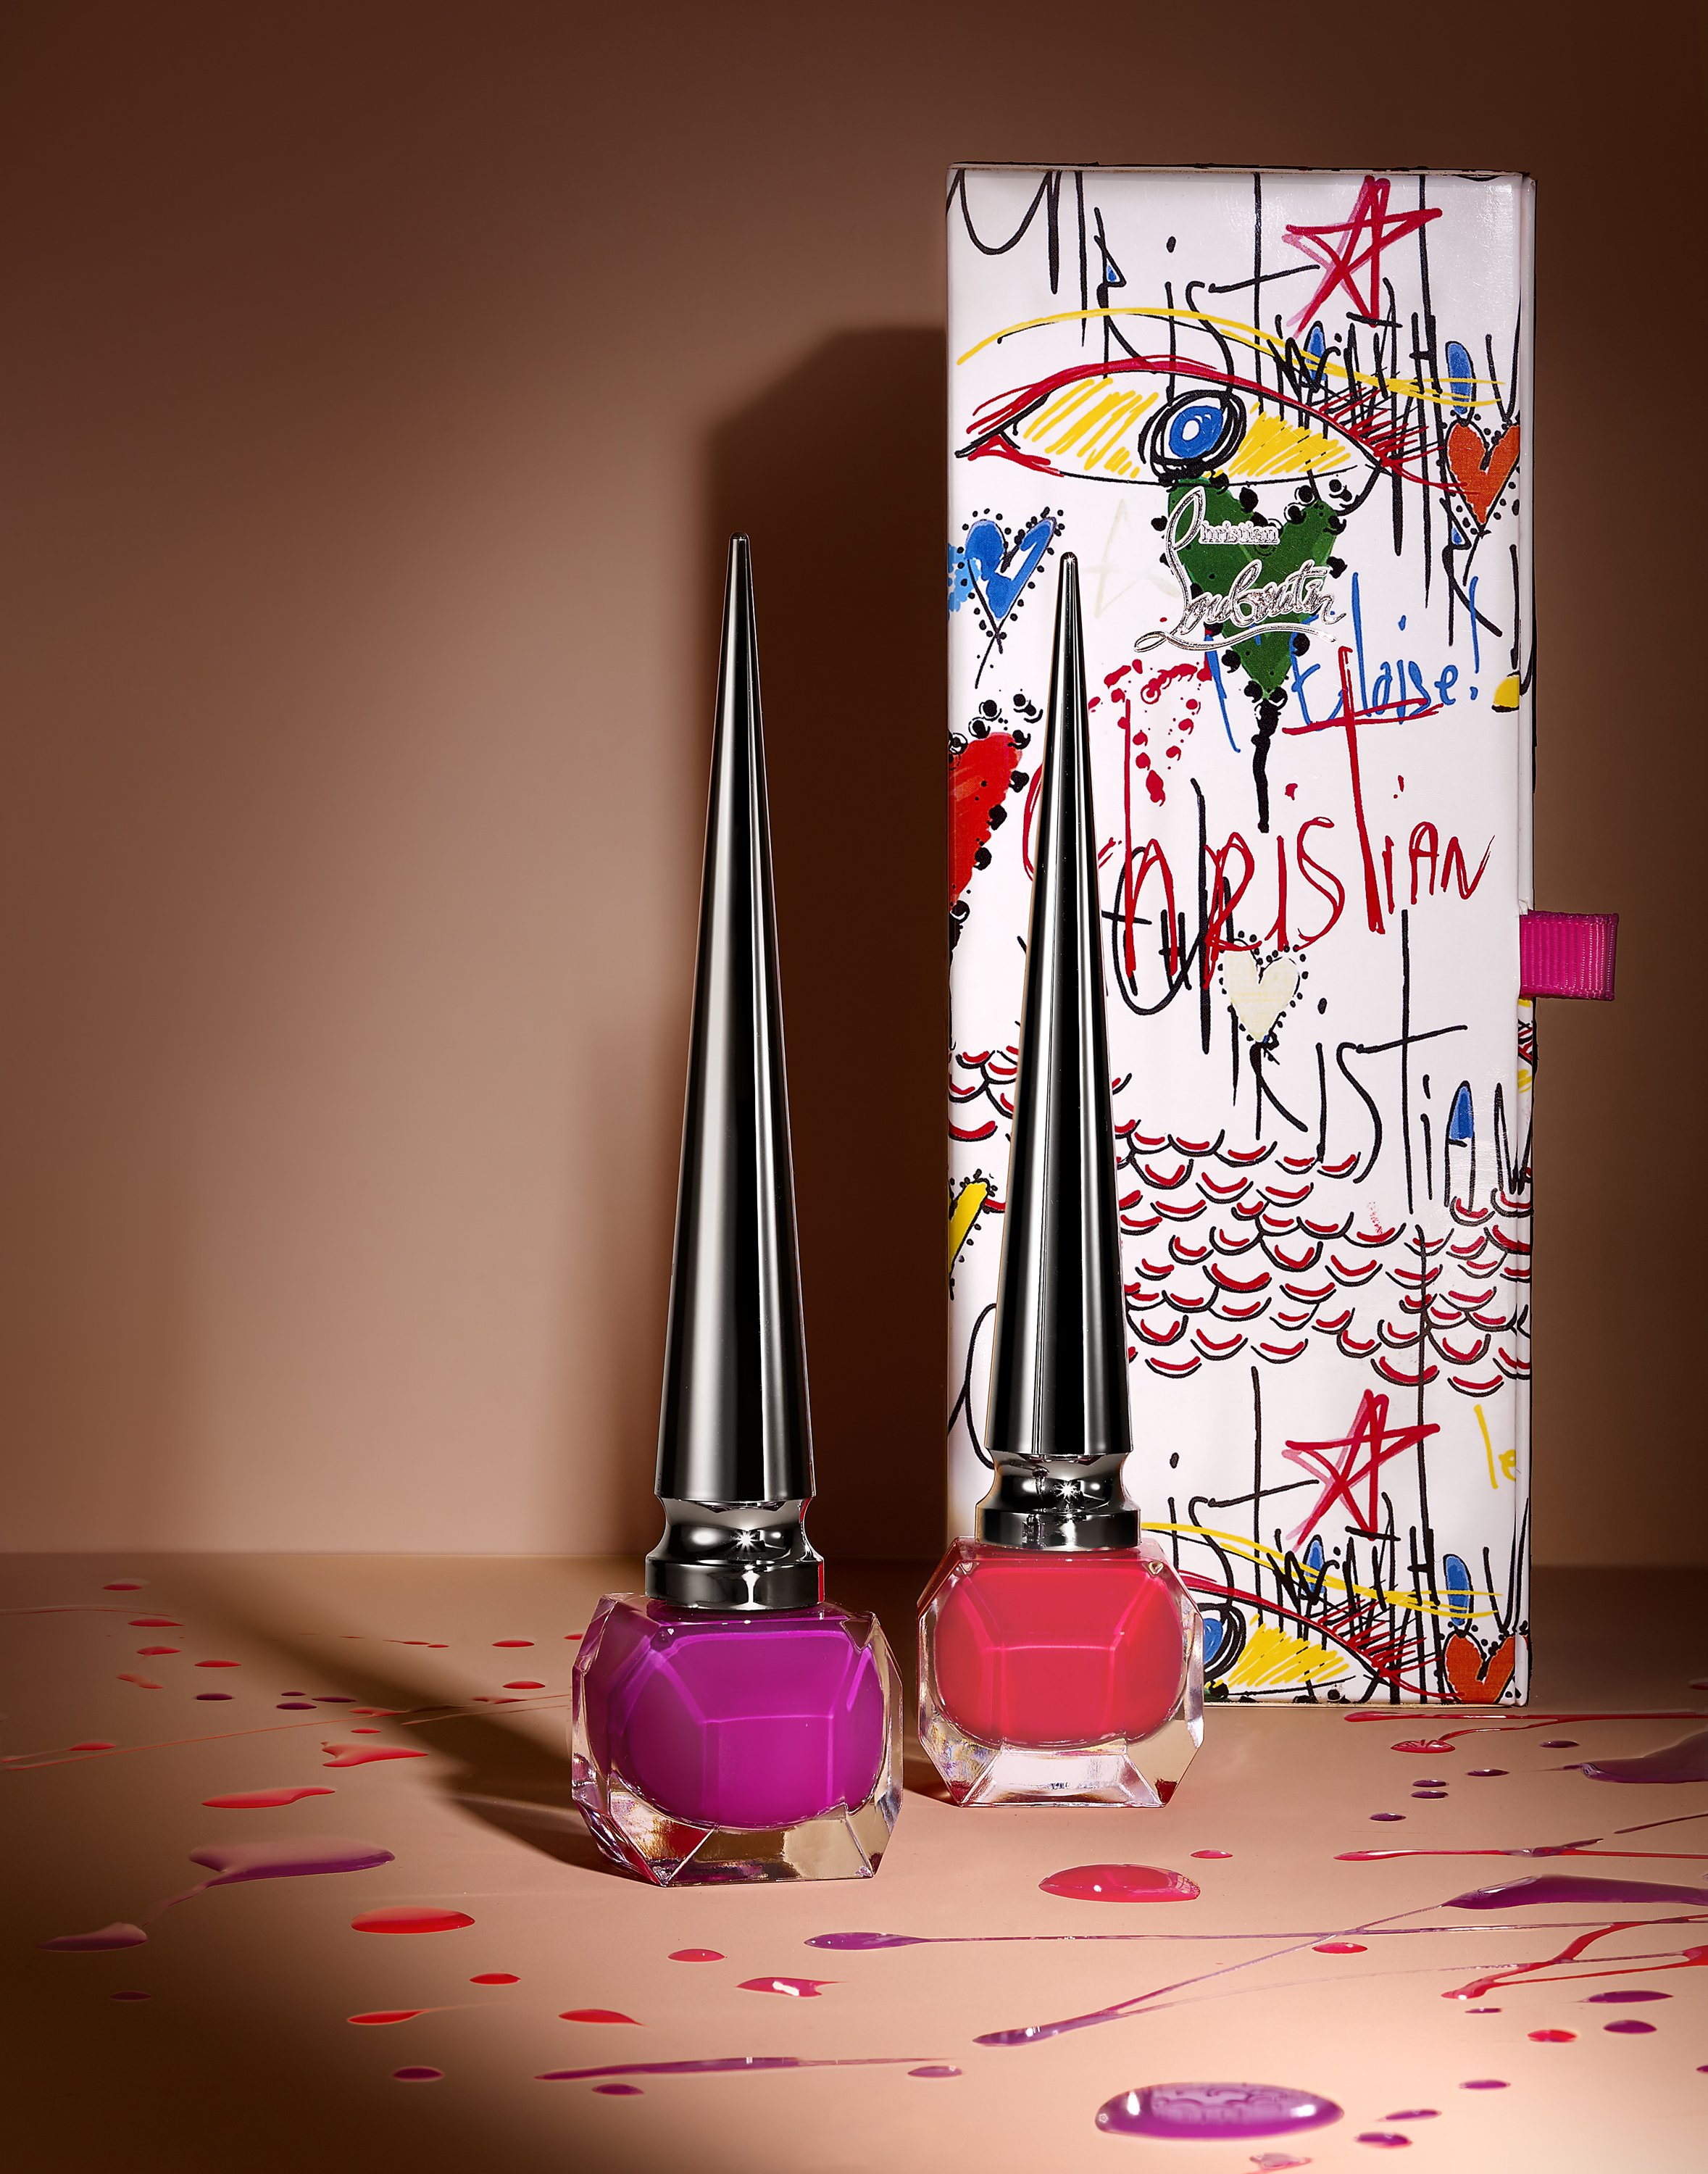 Christian Louboutin Twitter: "Pick your poision. Inspired by Christian Louboutin's Loubitag collection, Louboutin Beaute introduces three limited edition Nail Colour duos featuring Pluminette and Batignolles, Miss Loubi and Bolidonna, or